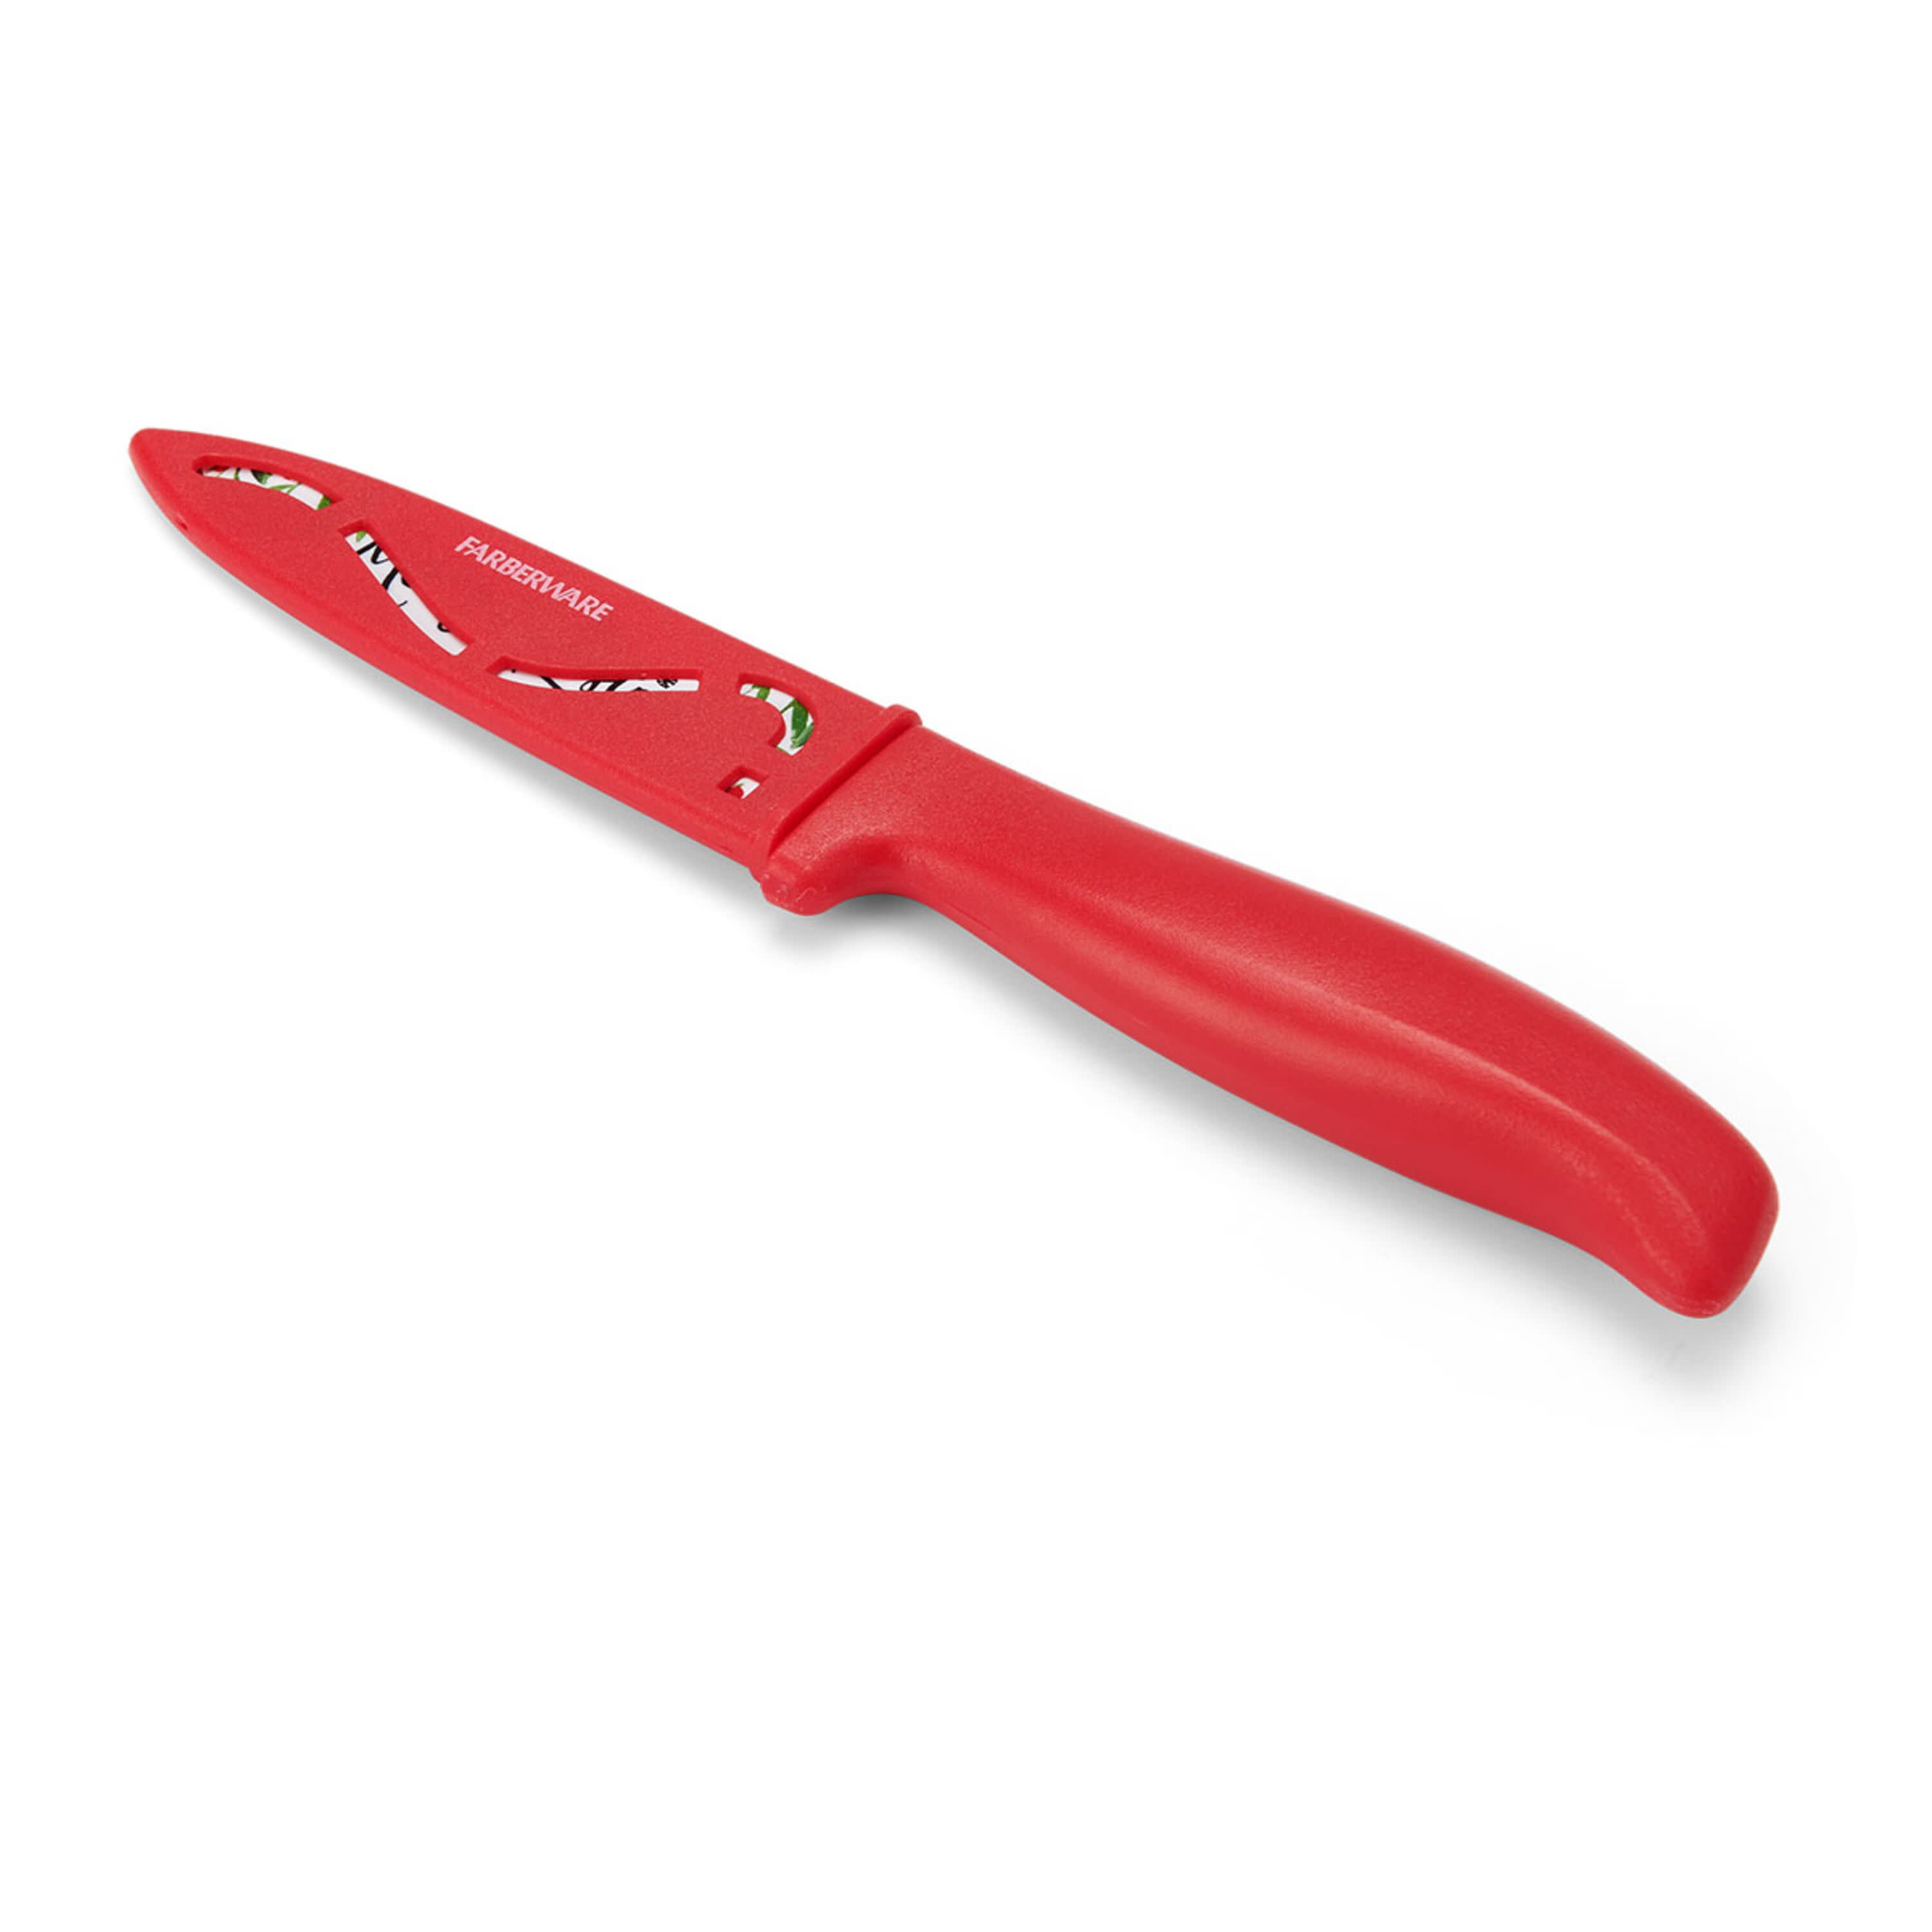 Farberware Holiday 3.5-inch Paring Knife with Merry Xmas Pattern 